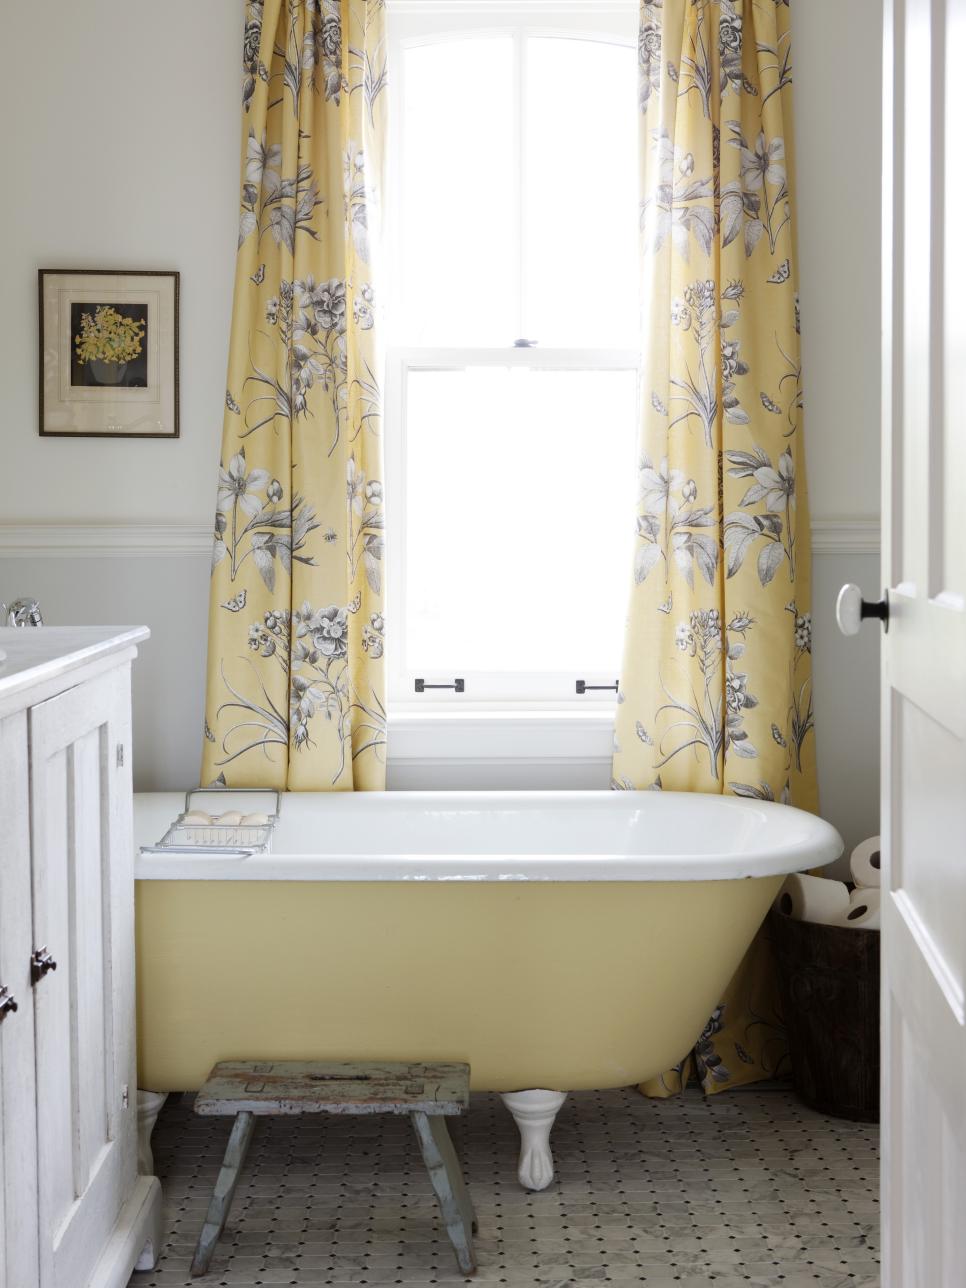 5 quick and easy ways to update a tired bathroom